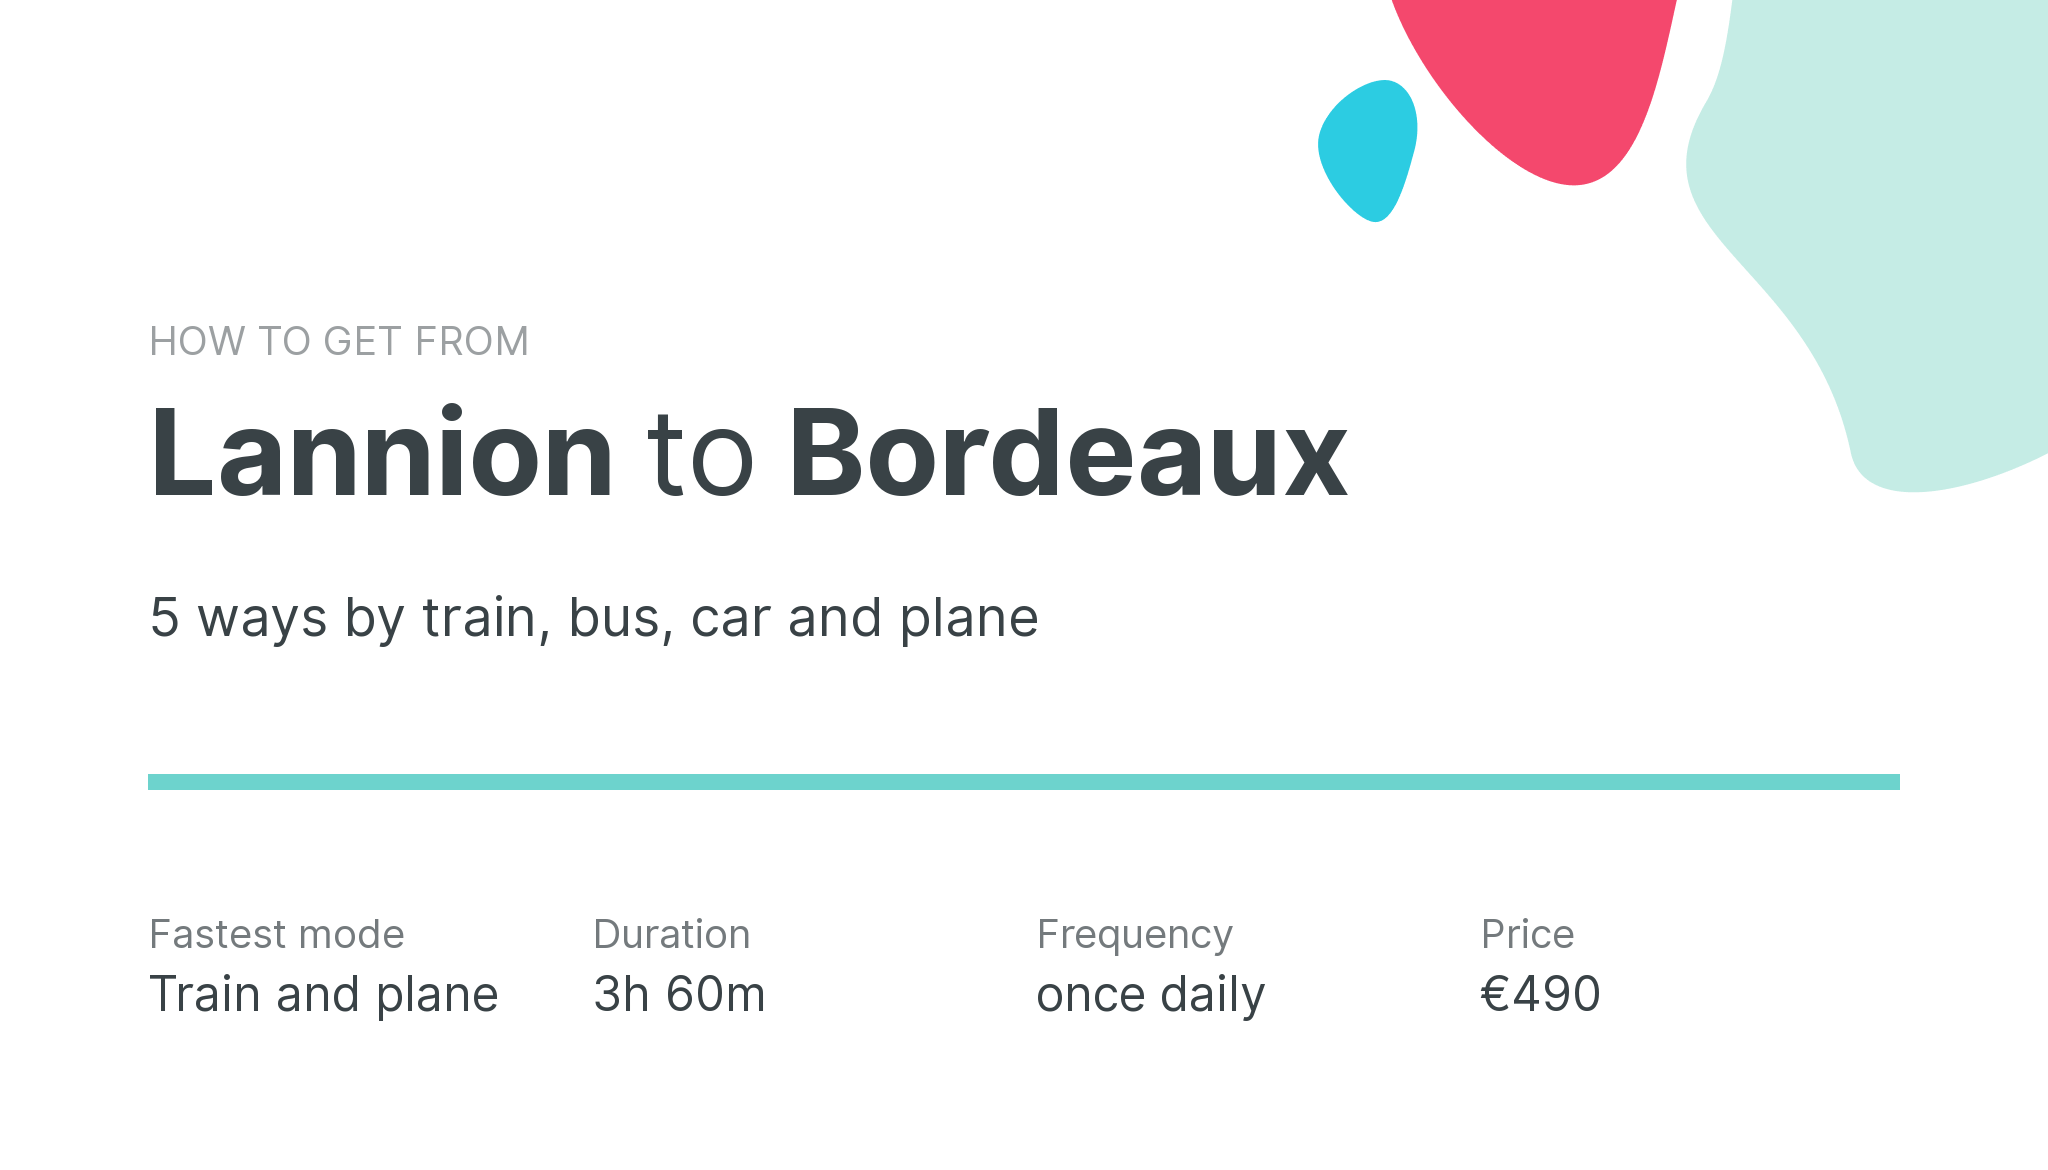 How do I get from Lannion to Bordeaux